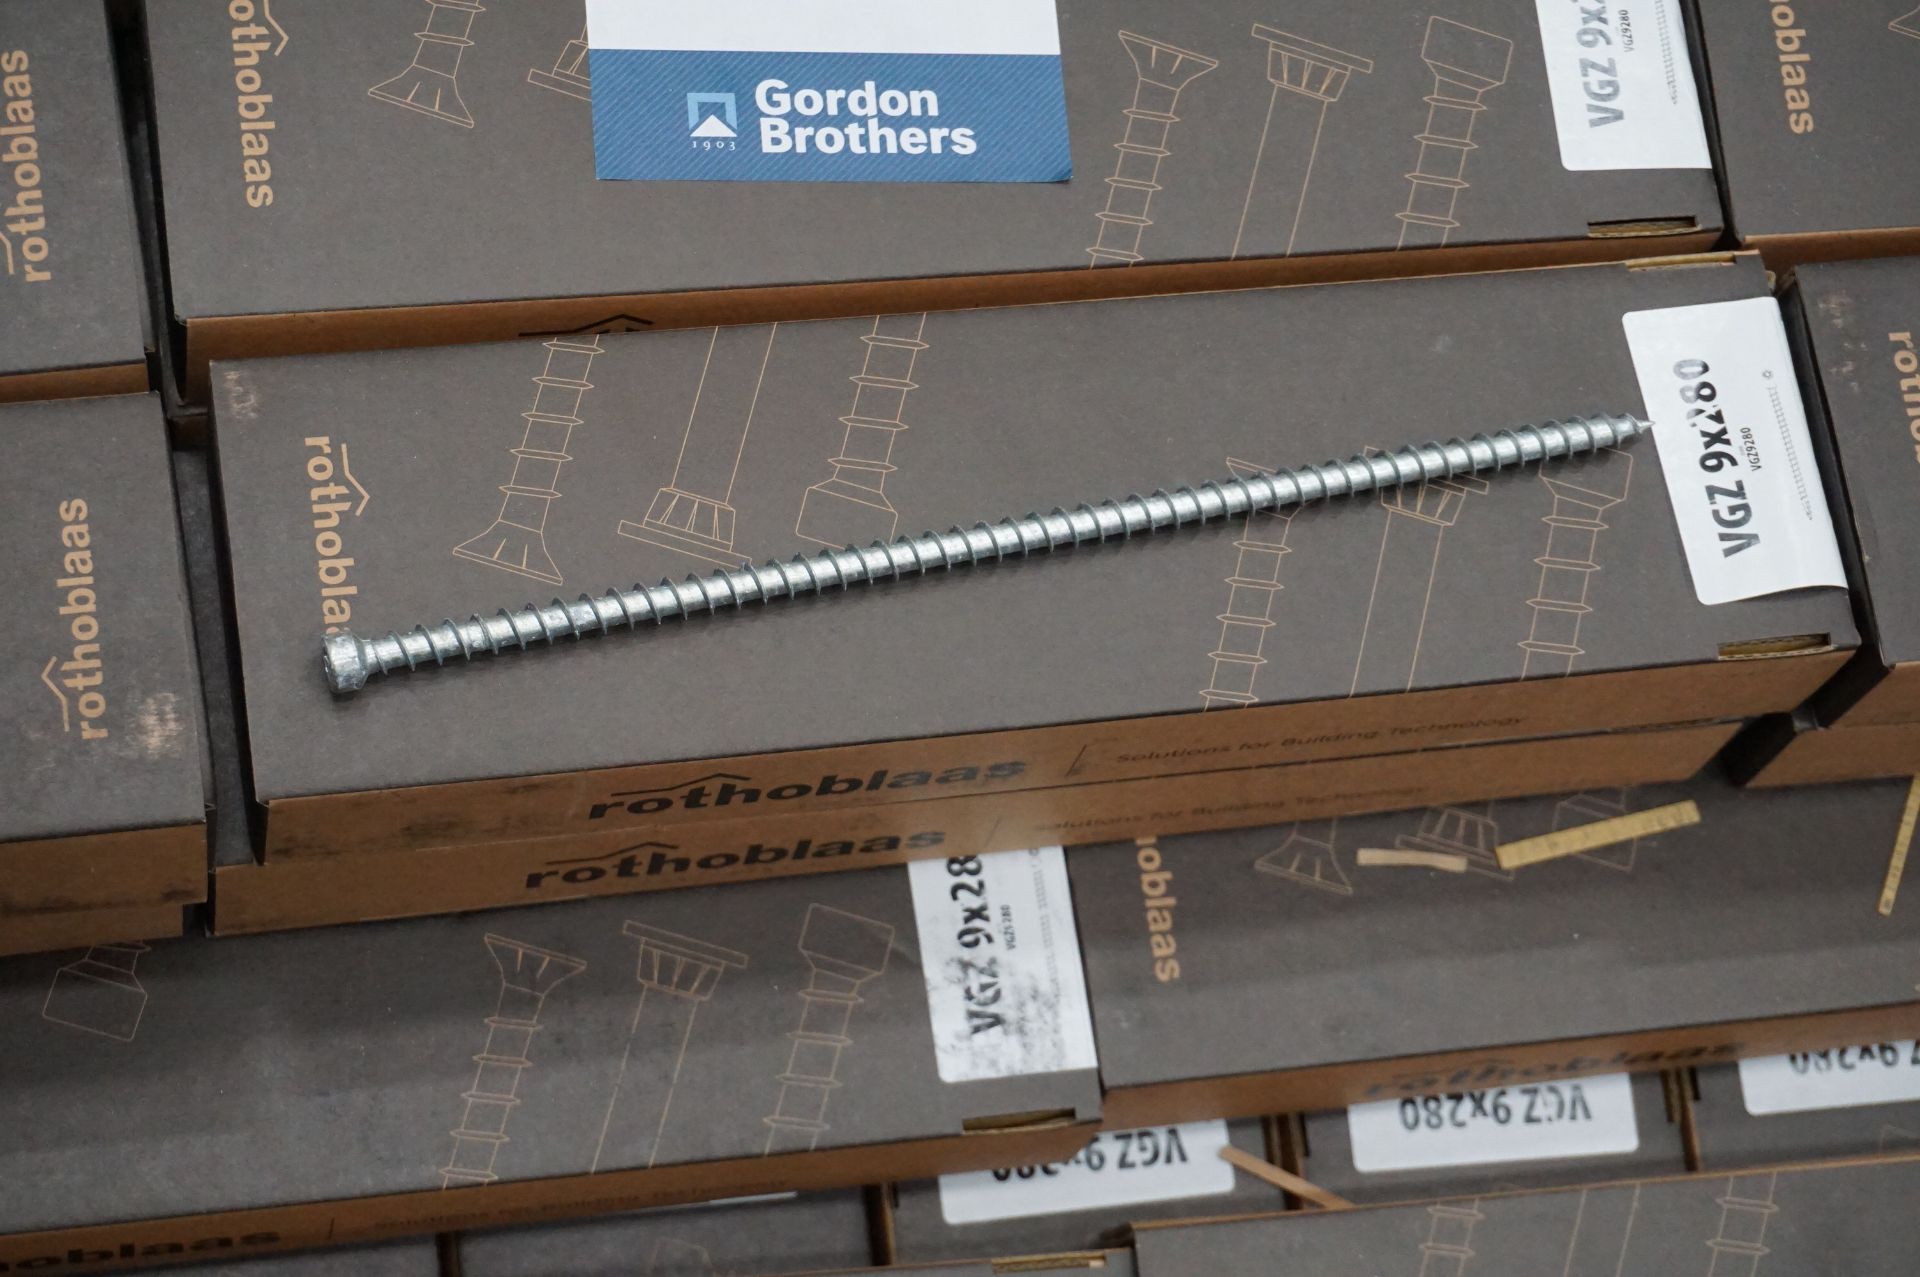 1x (no.) pallet box of Rothoblaas screws self tapping wood screws VGZ 9 x 280mm qty 3500 - Image 3 of 4